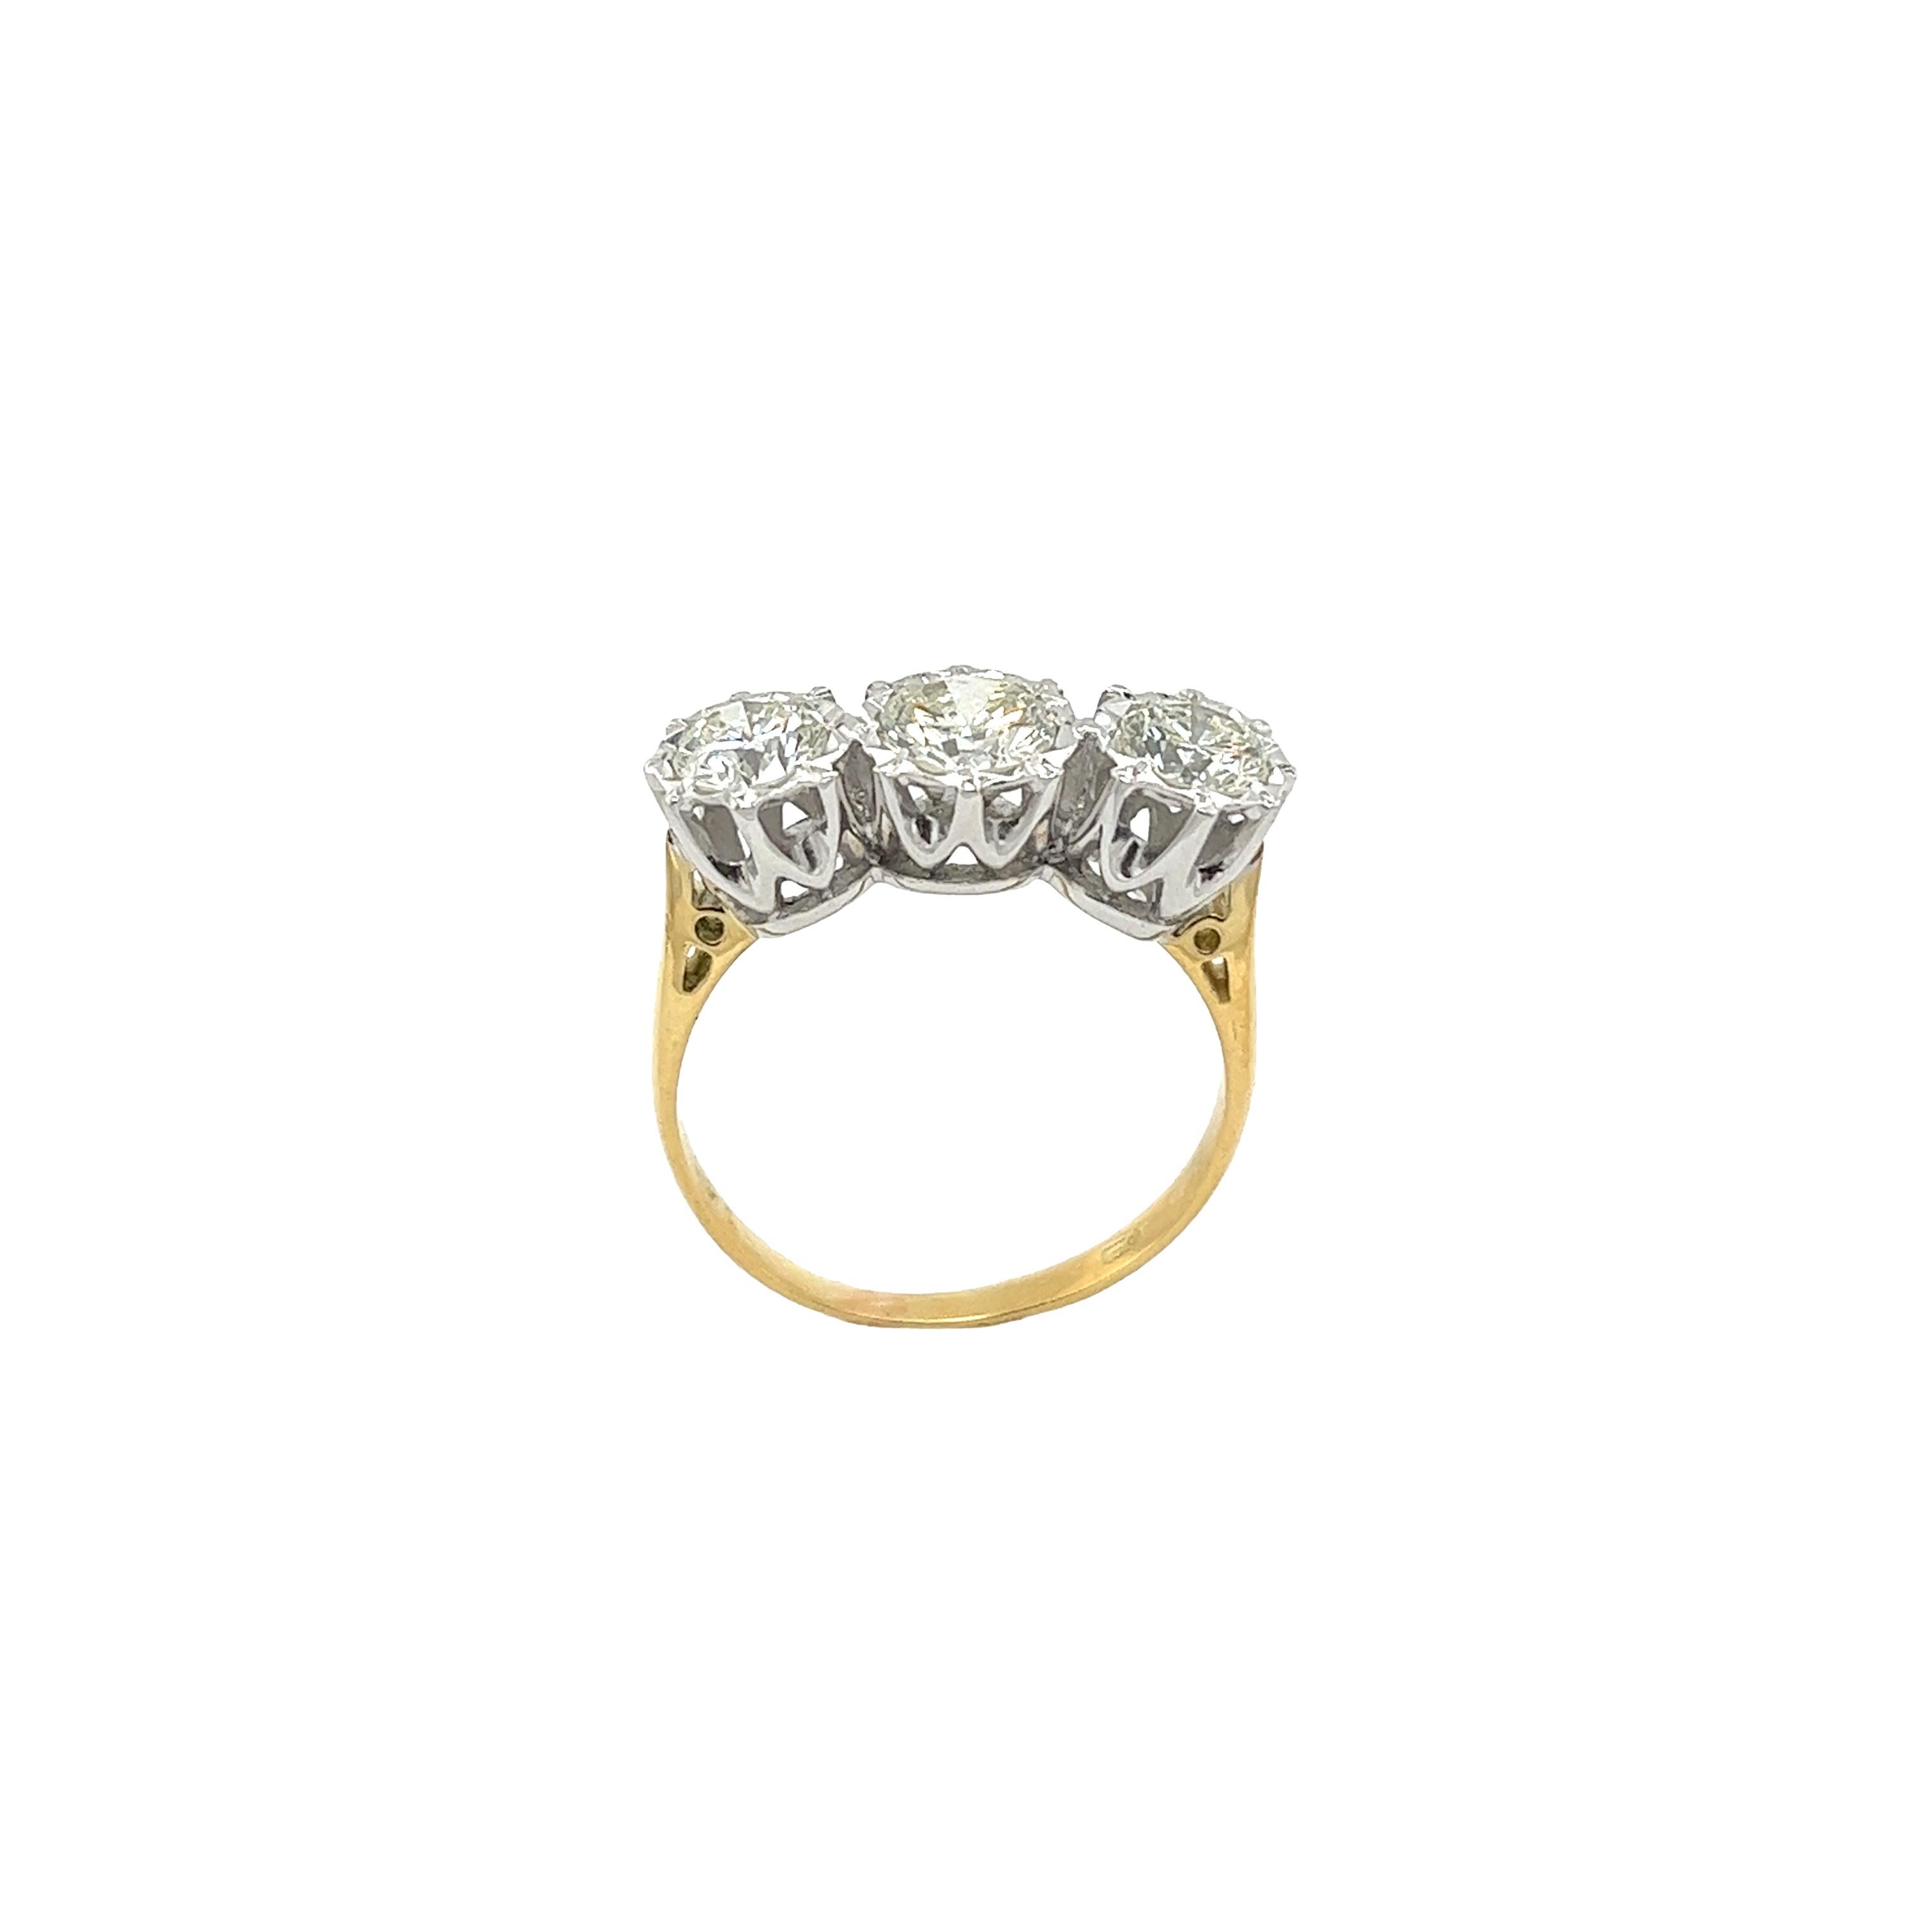 18ct Yellow & White Gold 3 Stone Diamond Ring, Set With 1.46ct Natural Diamonds For Sale 2